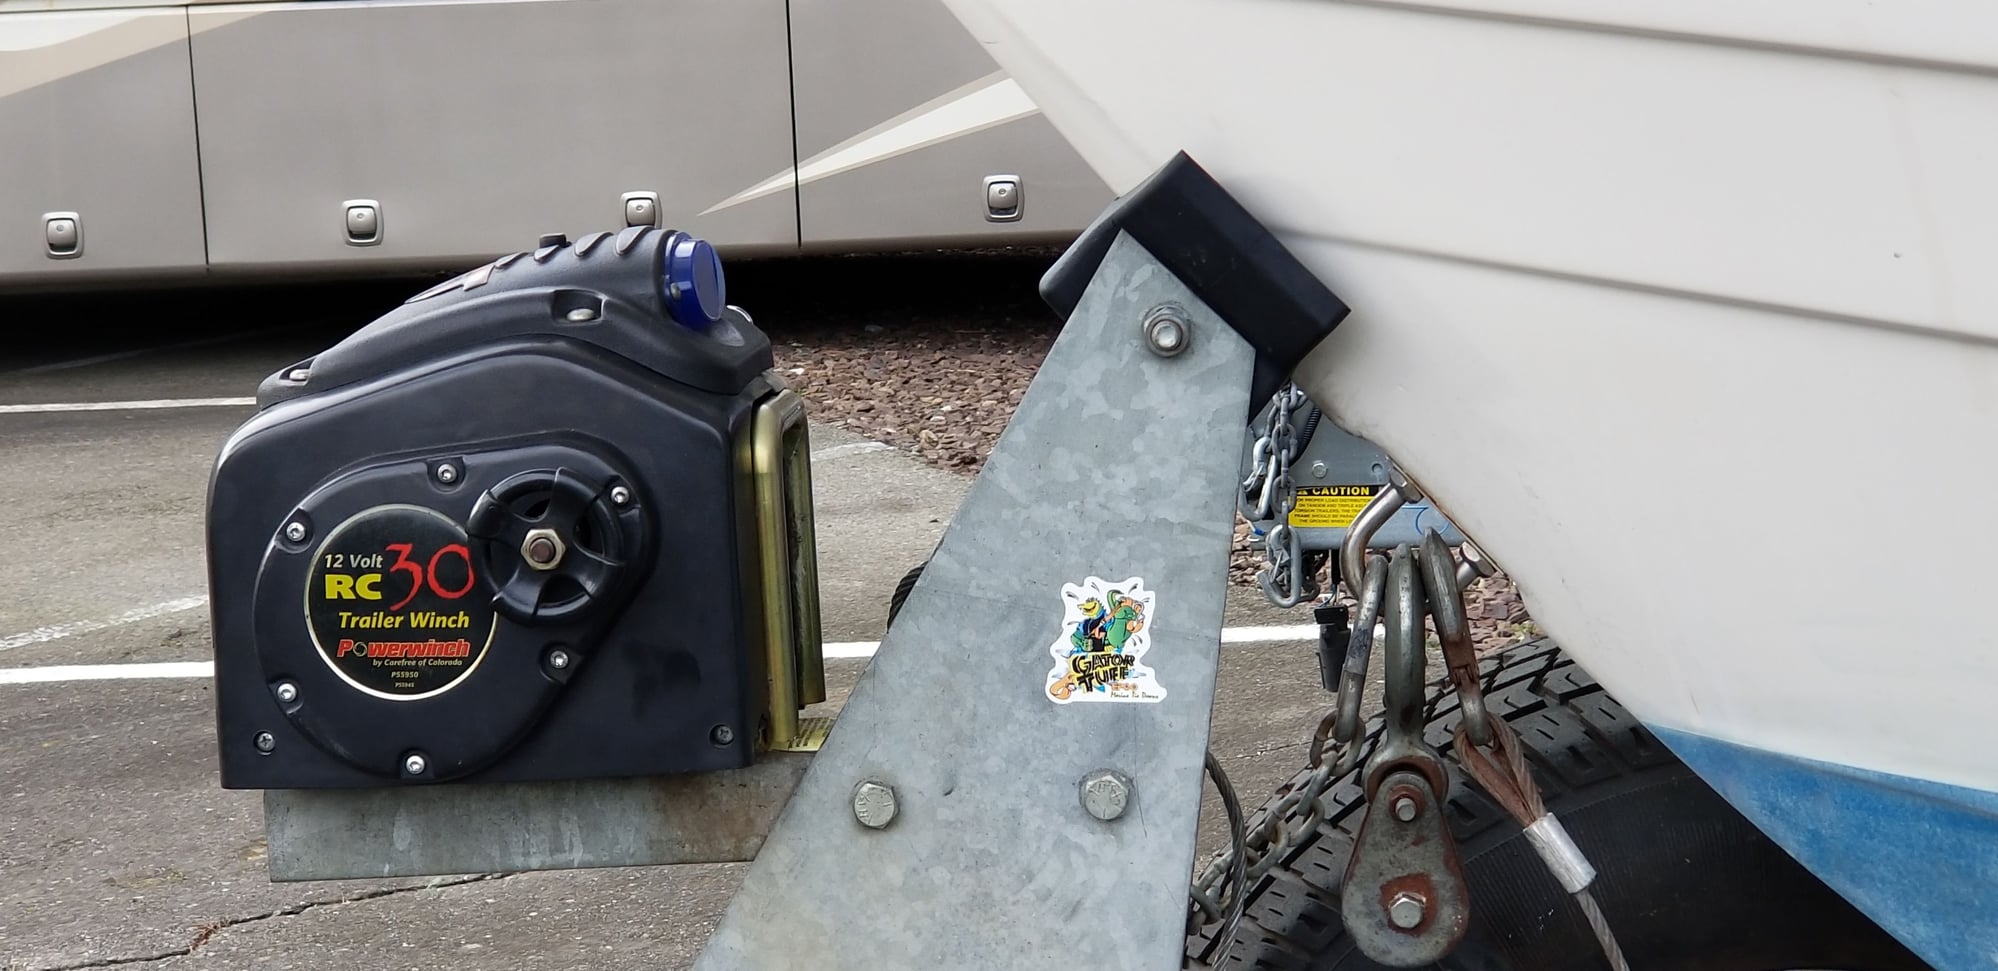 Electric trailer winch - The Hull Truth - Boating and Fishing Forum